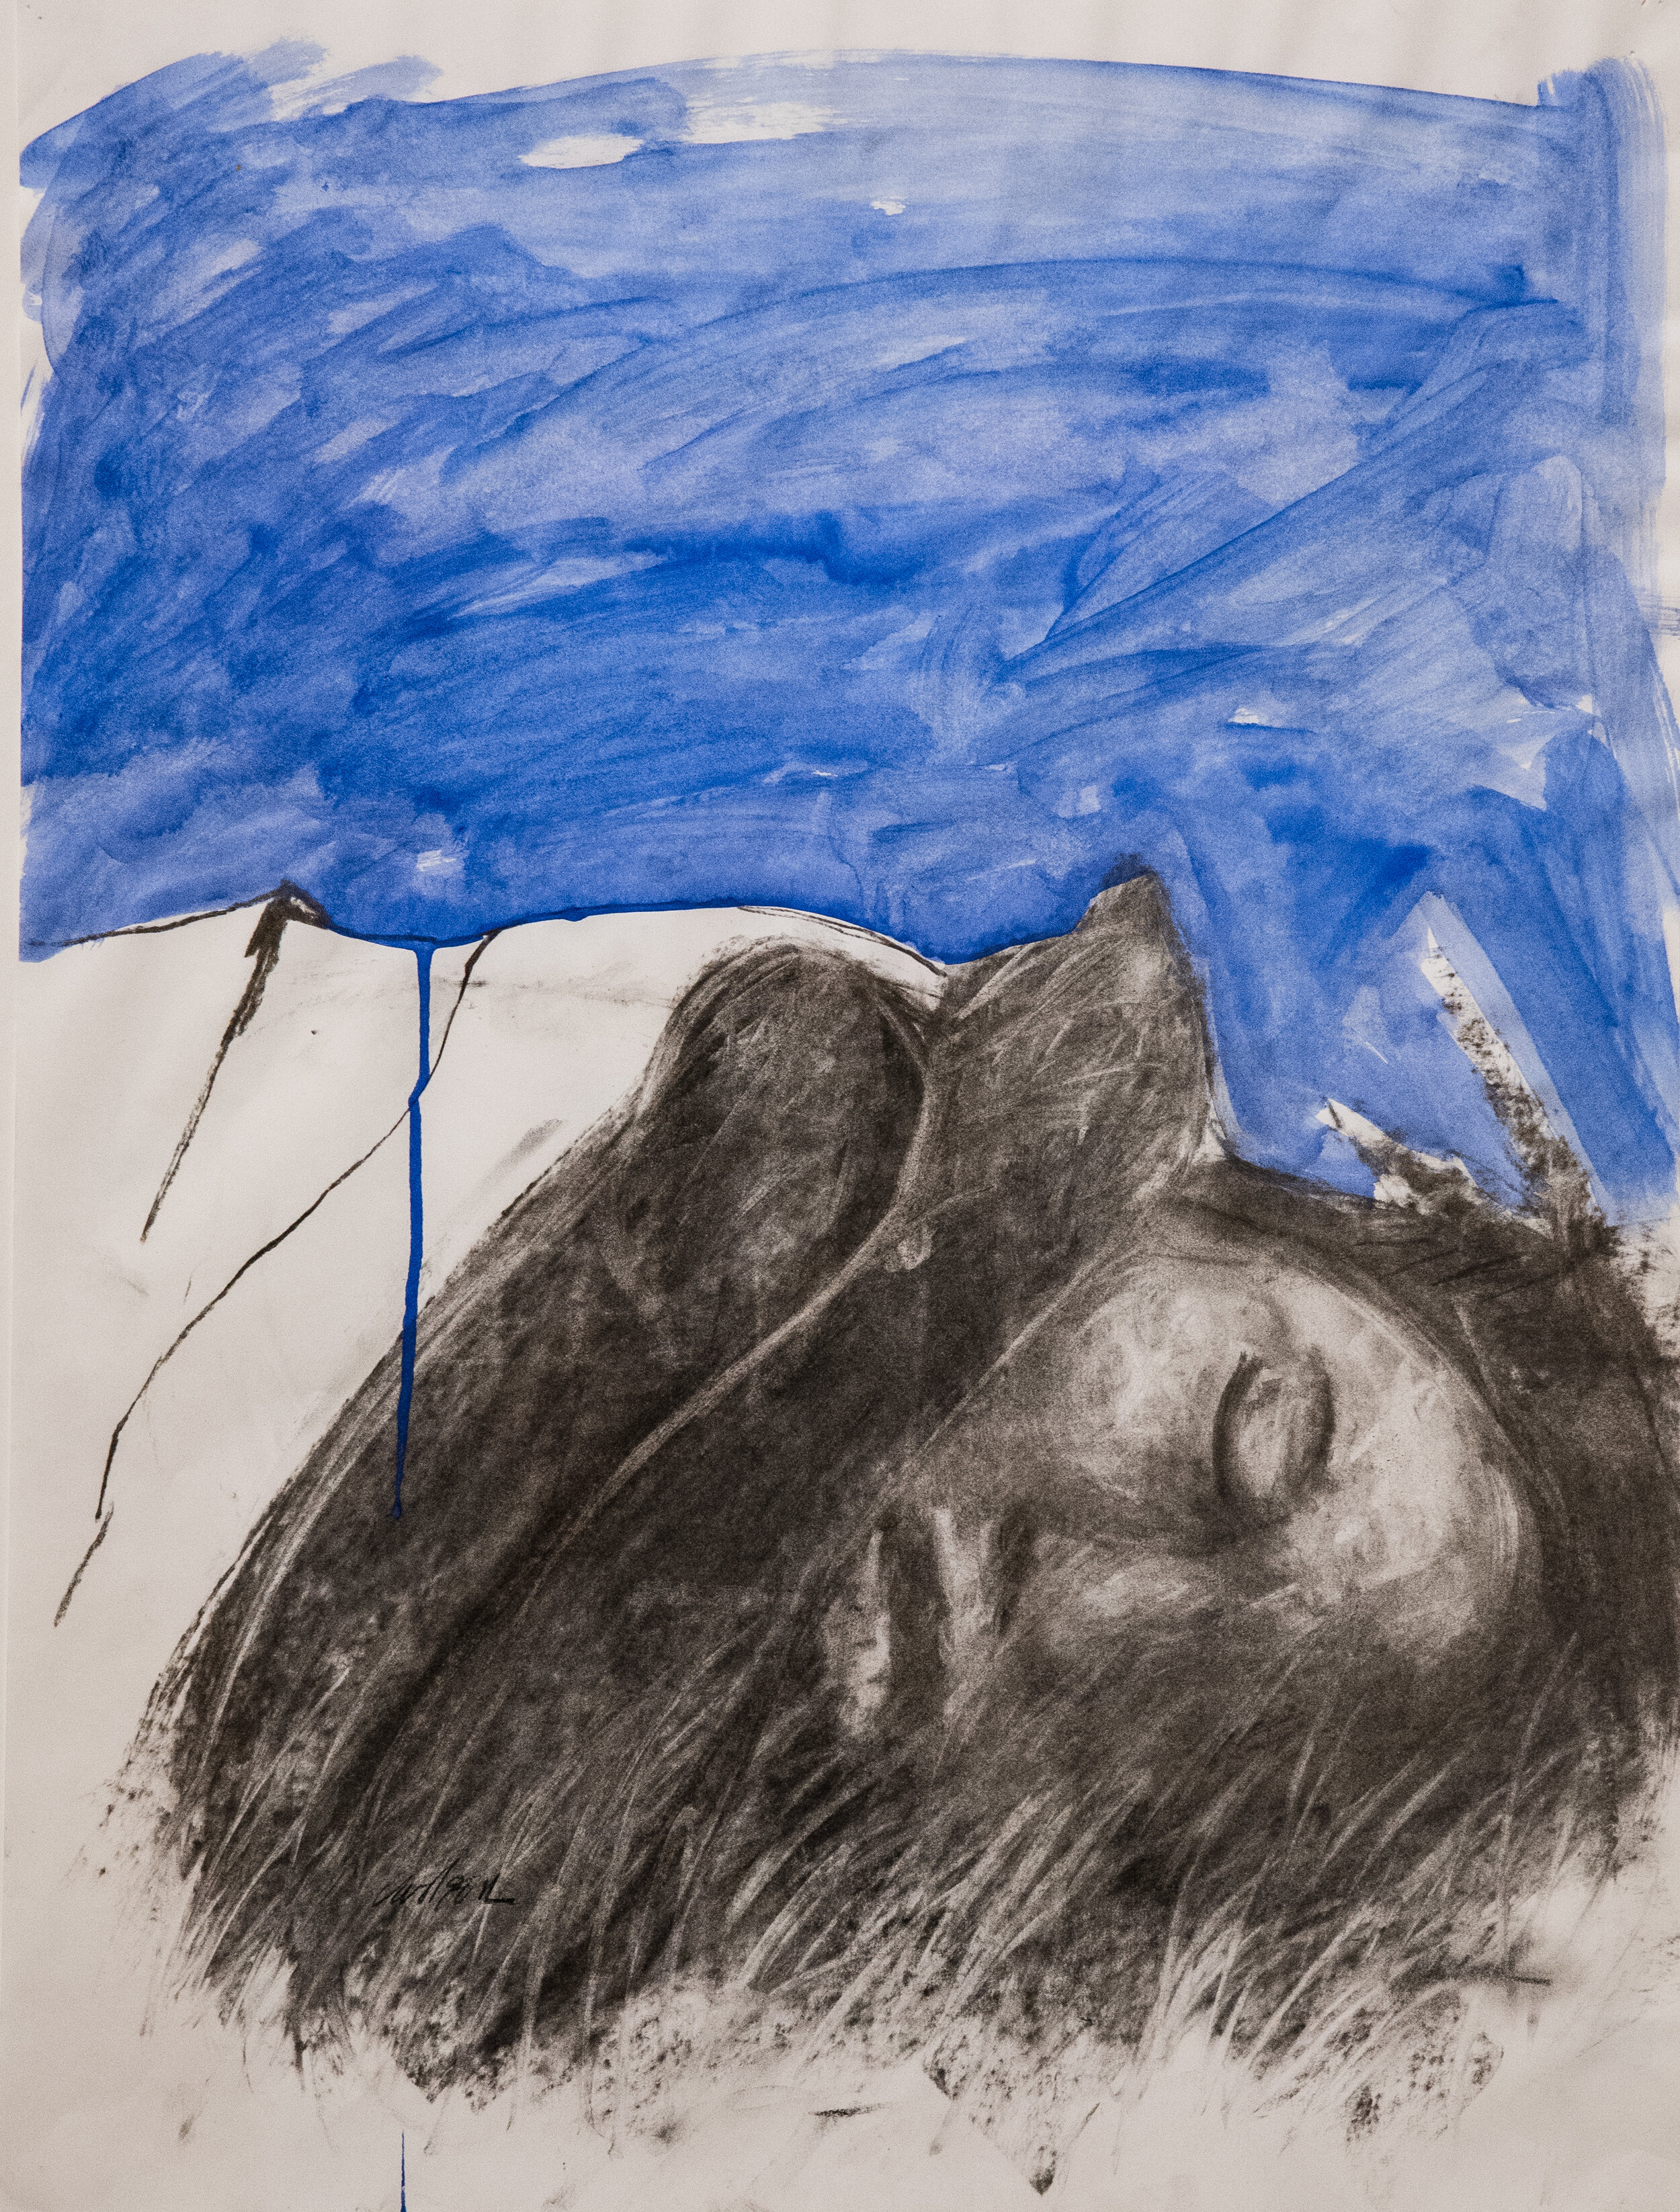 Carlson_Blues for Orpheus_Without Frame_charcoal + watercolor on paper_27.5 x 33 inches_2019_NFS.jpg